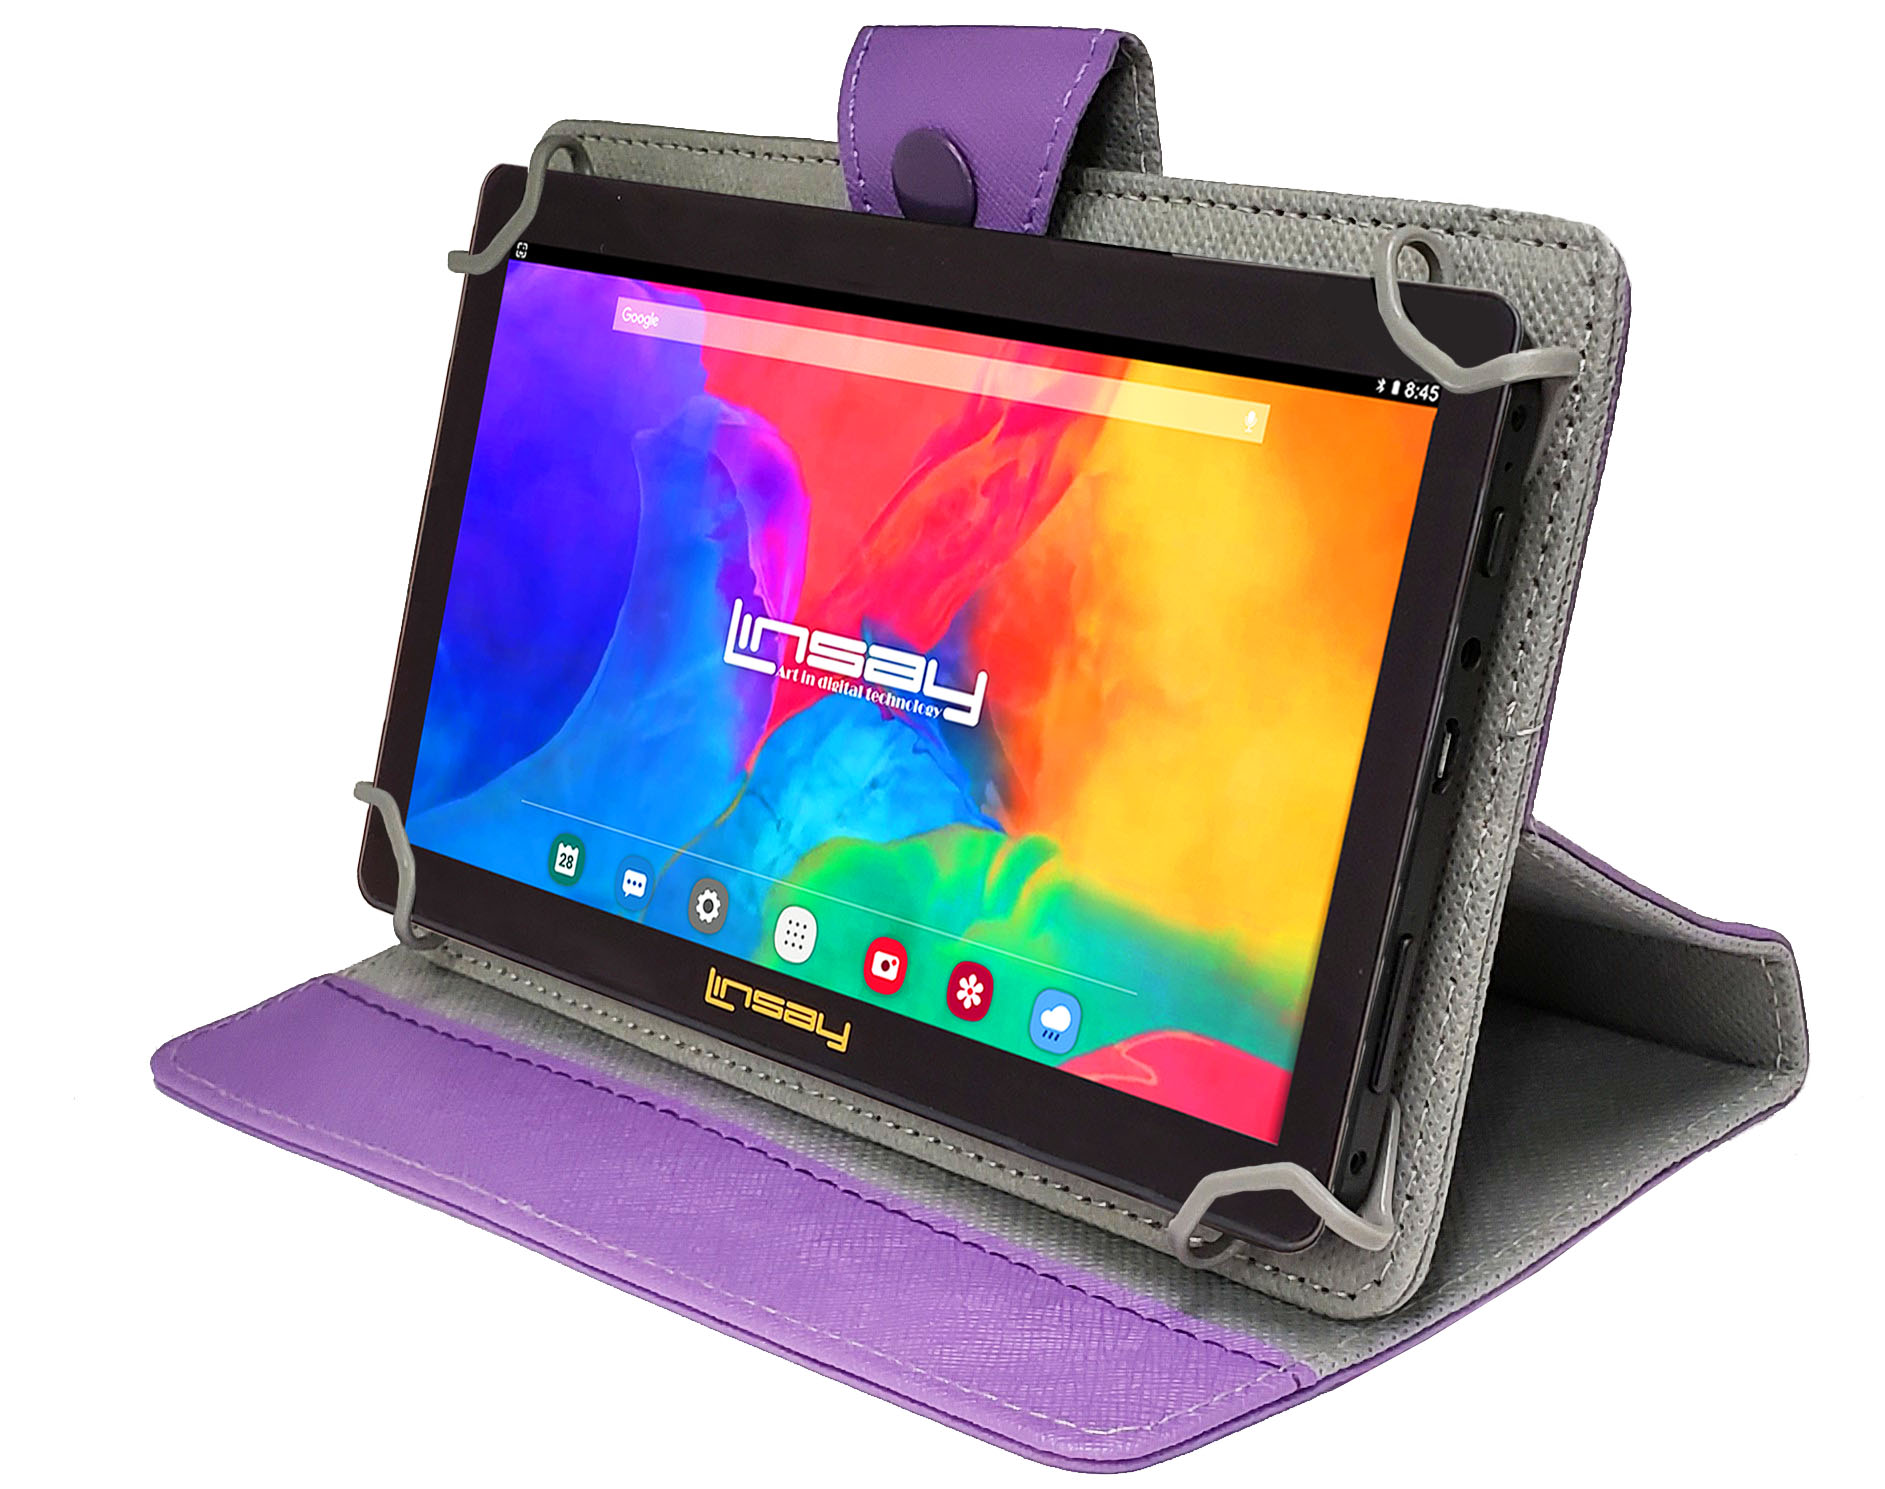 LINSAY 7" Quad Core 2GB RAM 64GB Storage Android 13 WiFi Tablet with Protective Case Purple - image 4 of 6